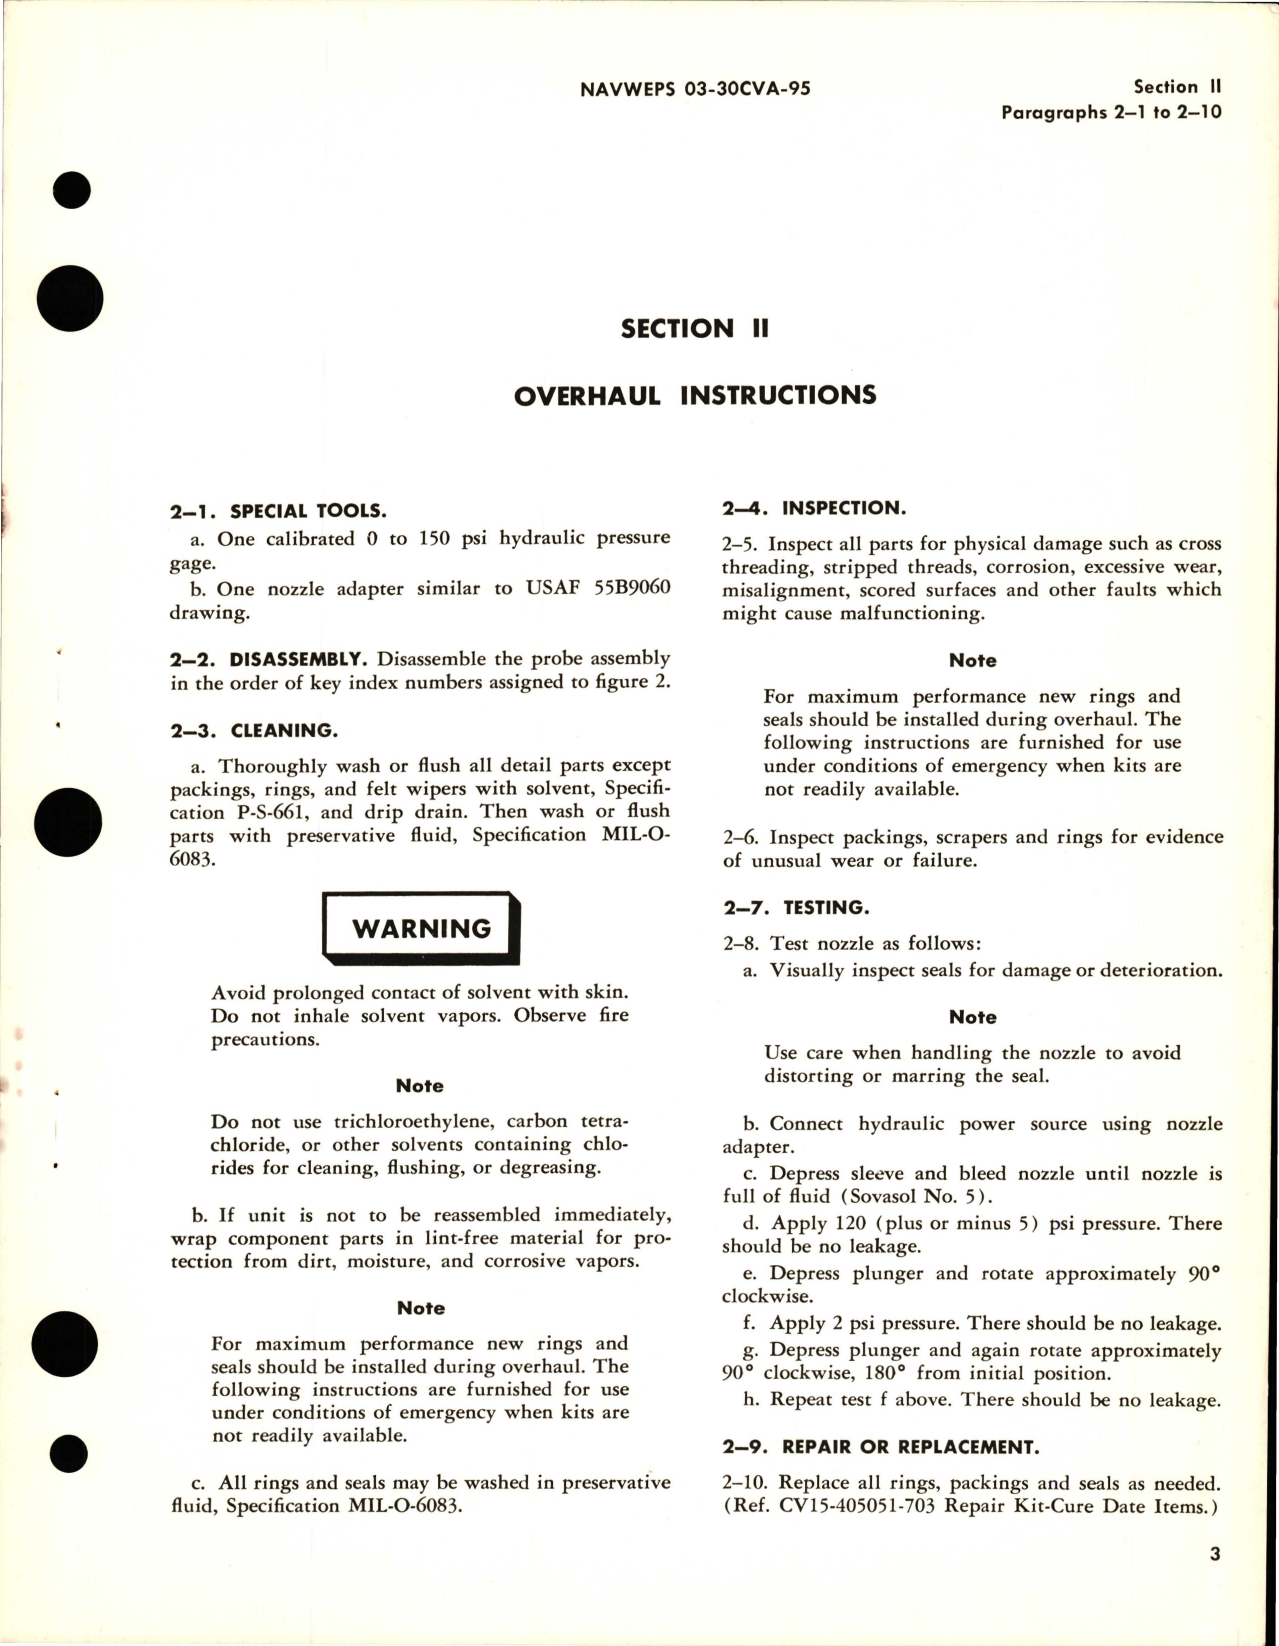 Sample page 5 from AirCorps Library document: Overhaul Instructions for Inflight Refueling Probe Assembly